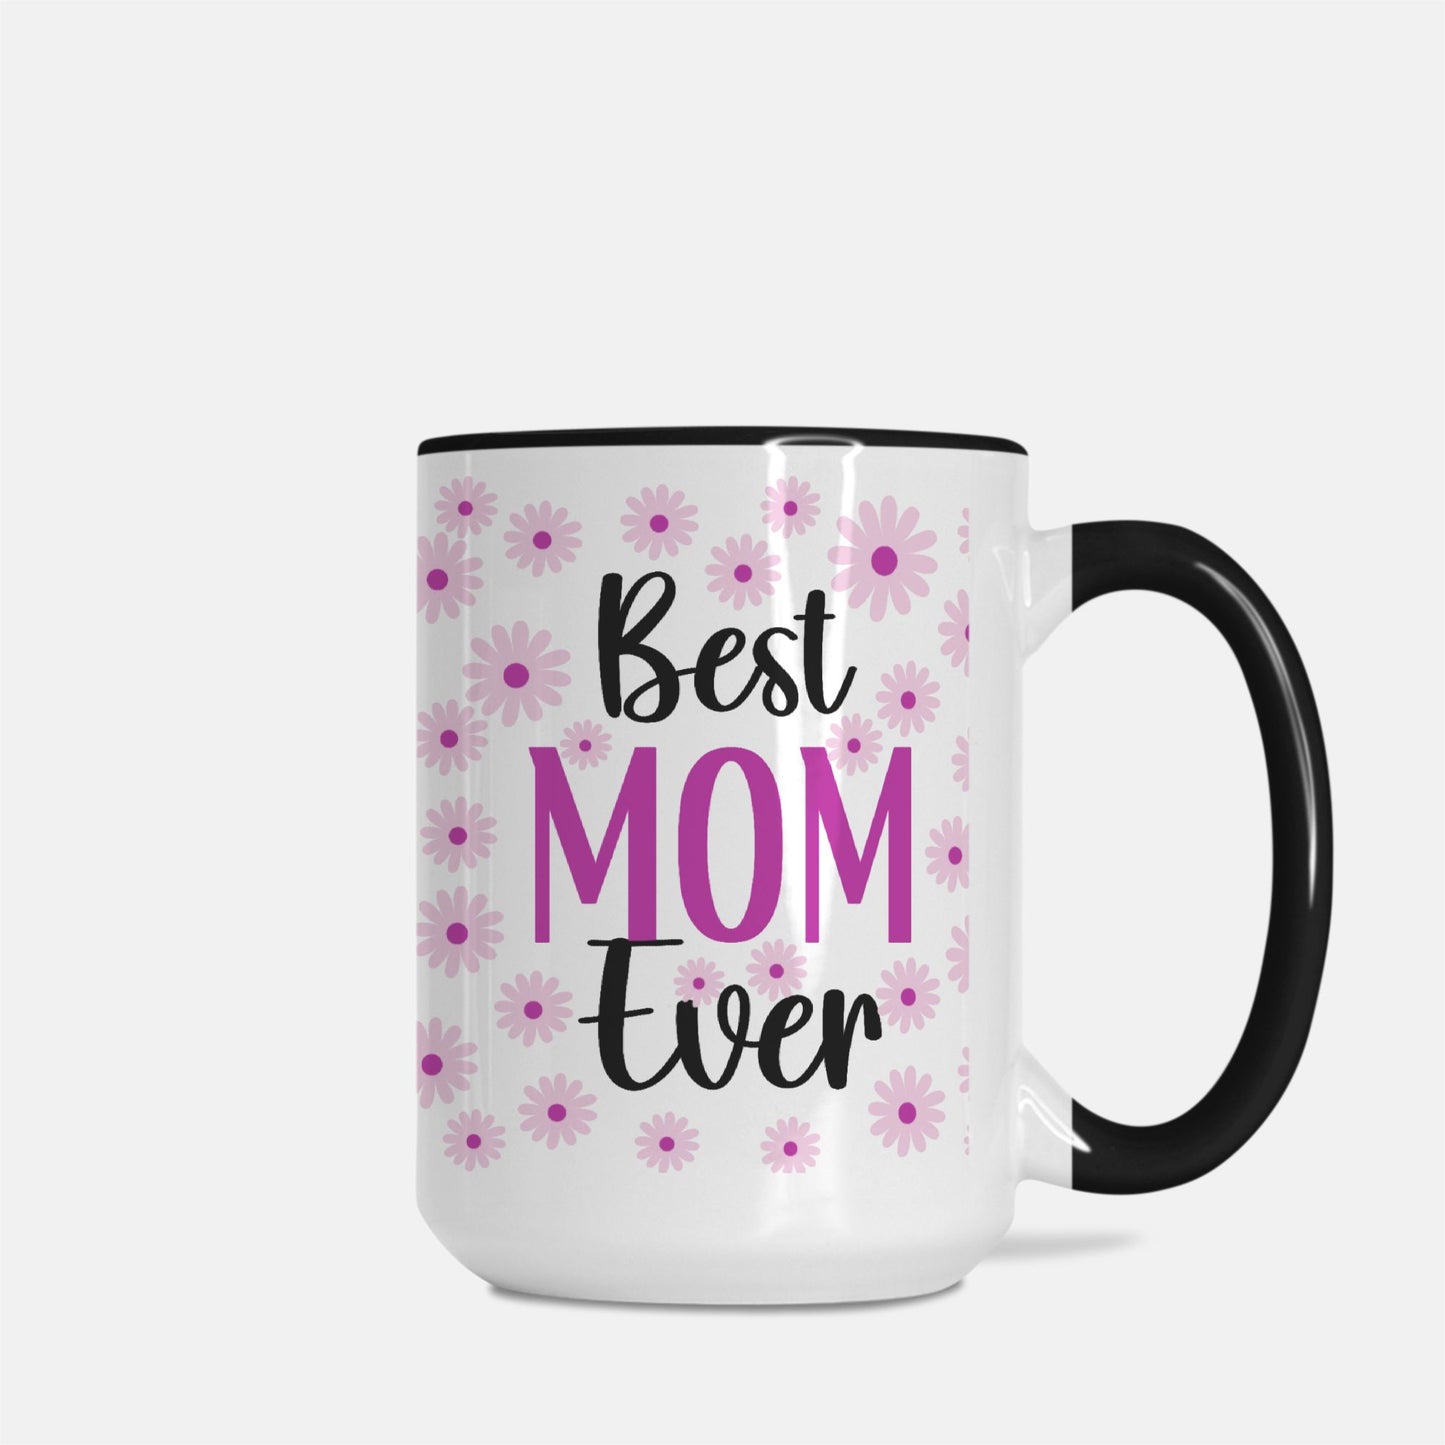 mothers day mug with best mom ever and pink daisy print, gift for mom